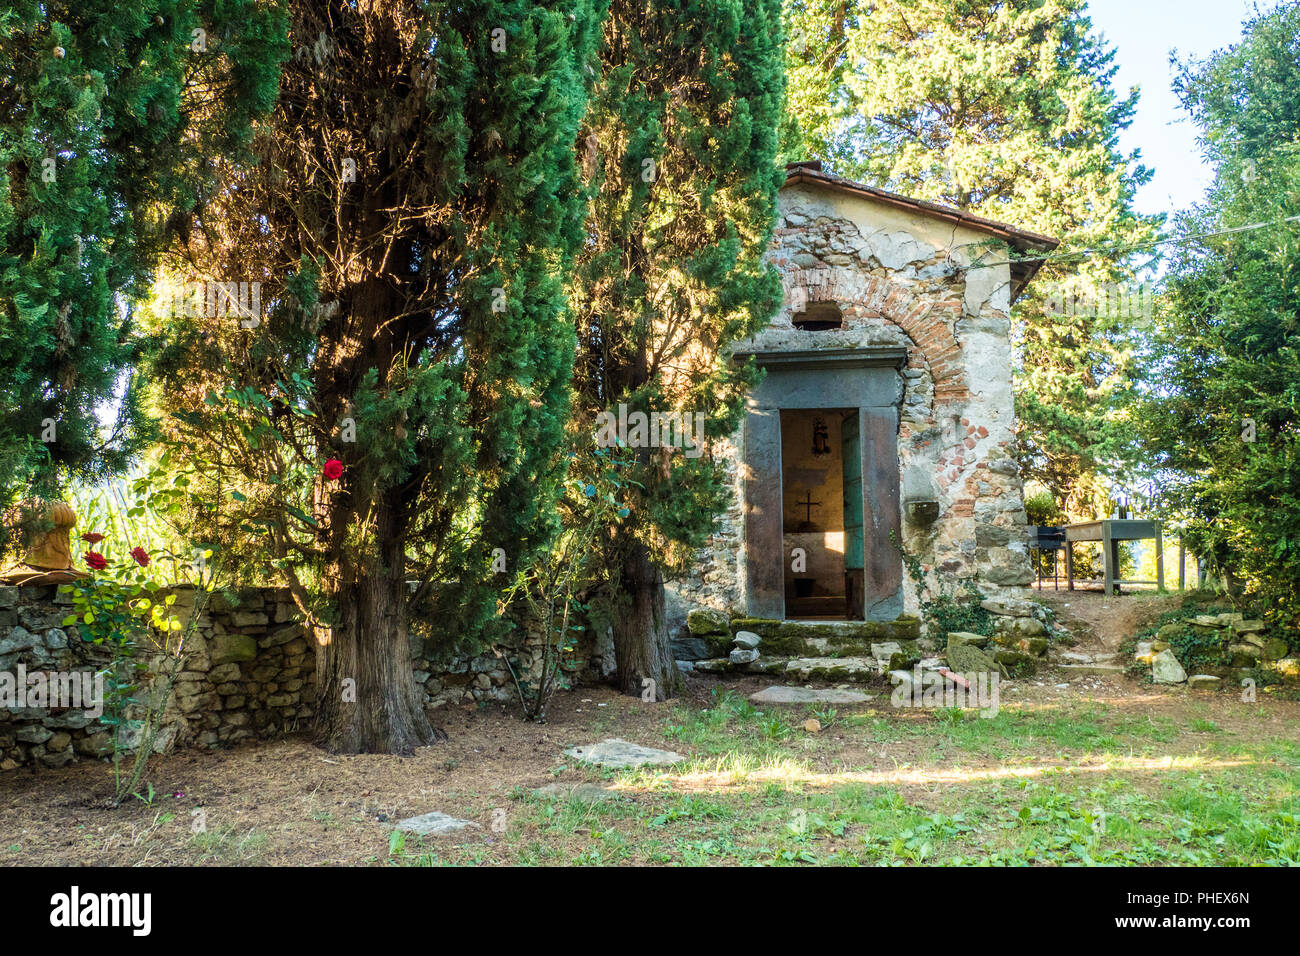 Garden Chapel at a farmhouse in the town of Borgo a Mozzano in the Lucca province of Tuscany, Italy Stock Photo